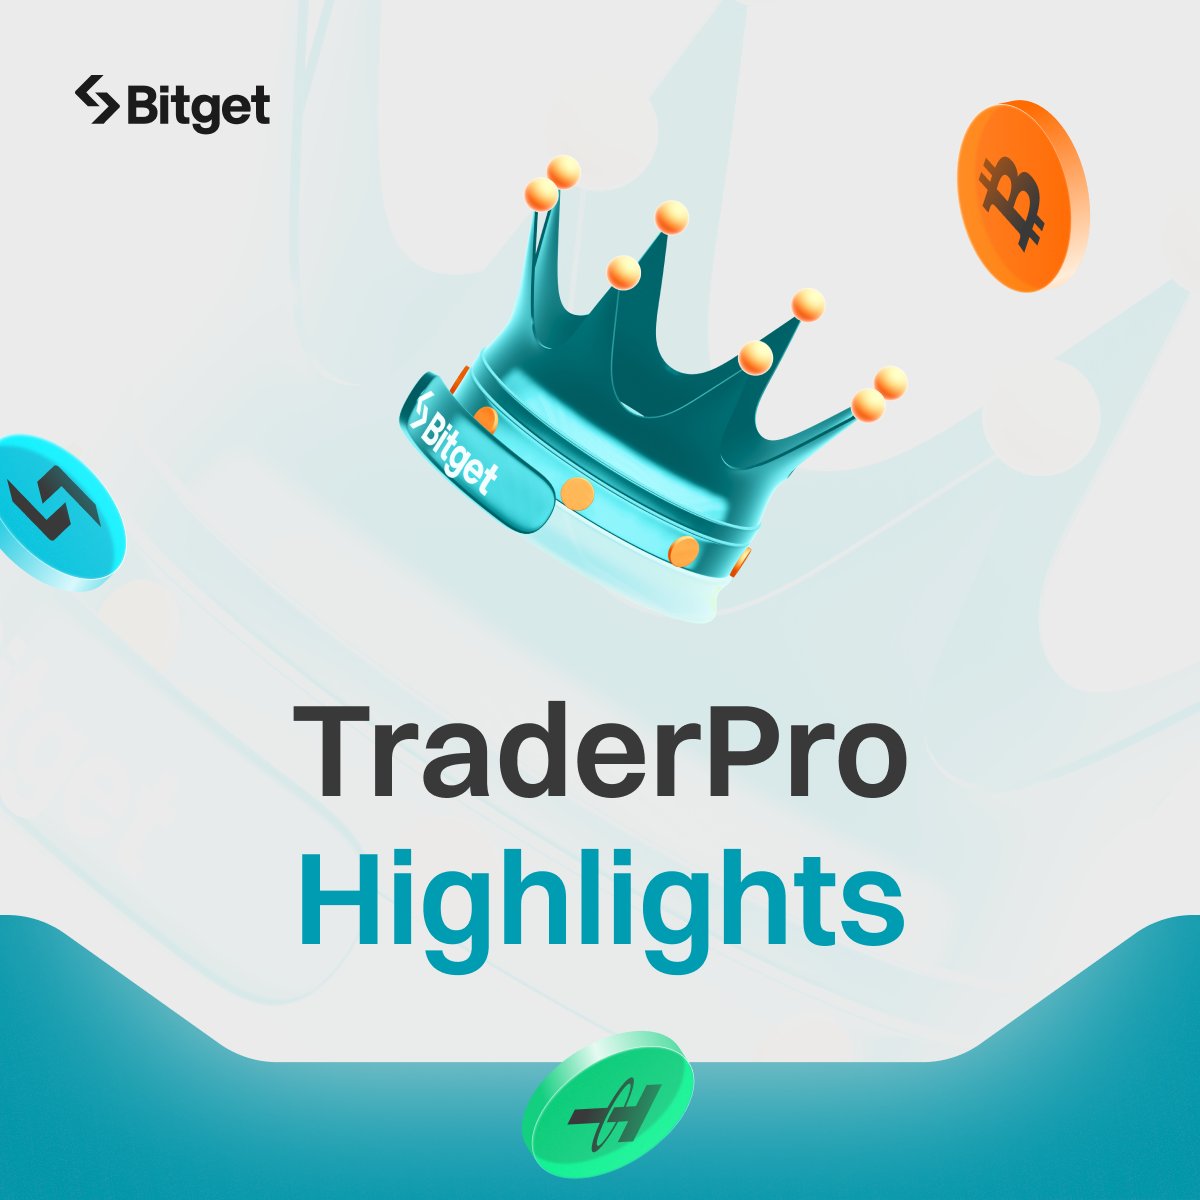 💰 Win 10,000 USDT by joining #Bitget #TraderPro new season! ✅ Free entry: Register now ✅ 0 investment: All thrills, no costs ✅ Grand prize challenge: Win 10,000 USDT ✅ Dual profits: Earn from trading & copy trading ✅ Huge exposure: Become a verified elite trader 🏆 Start